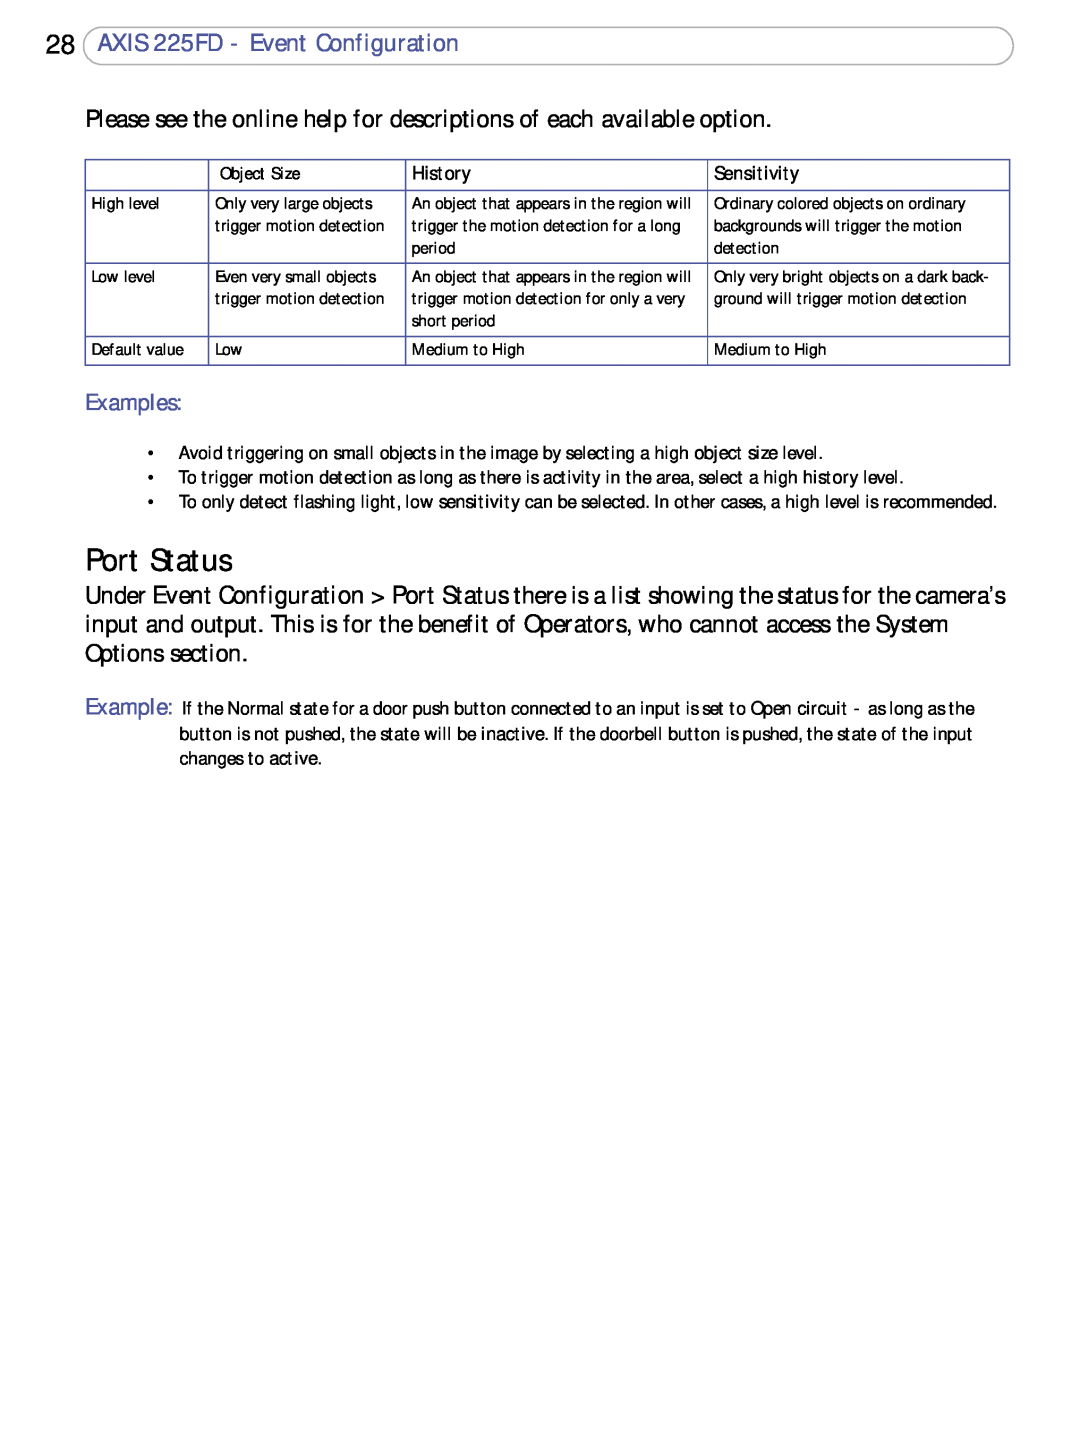 Axis Communications user manual Port Status, AXIS 225FD - Event Configuration, Examples 